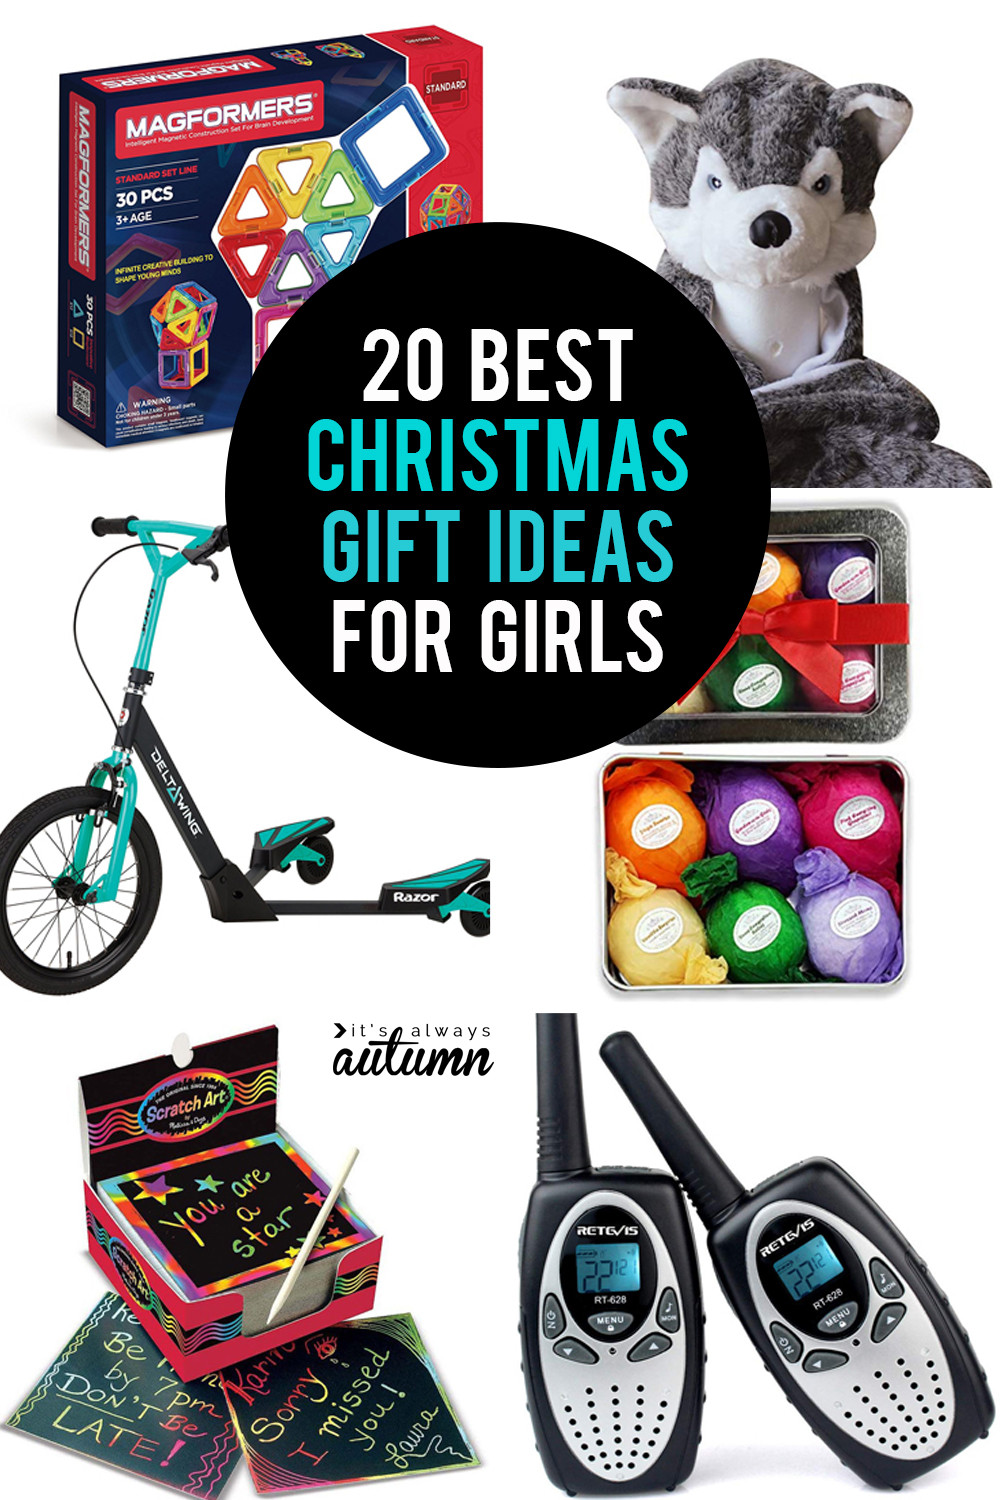 Top Christmas Gift Ideas
 The 20 best Christmas ts for girls It s Always Autumn